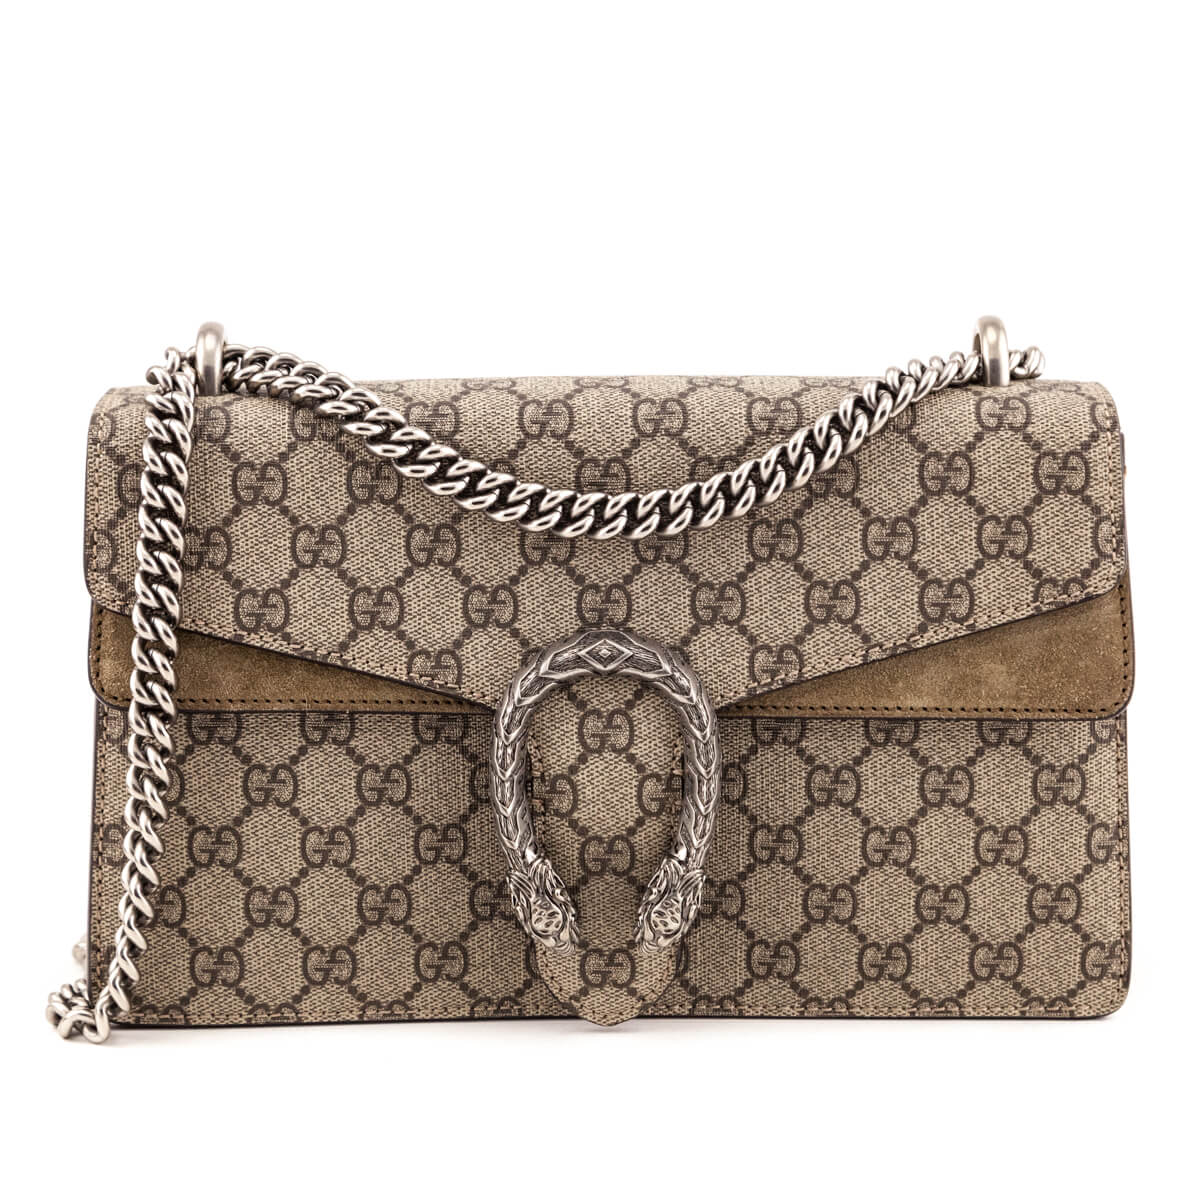 Gucci Beige GG Supreme & Taupe Suede Small Dionysus Bag - Love that Bag etc - Preowned Authentic Designer Handbags & Preloved Fashions